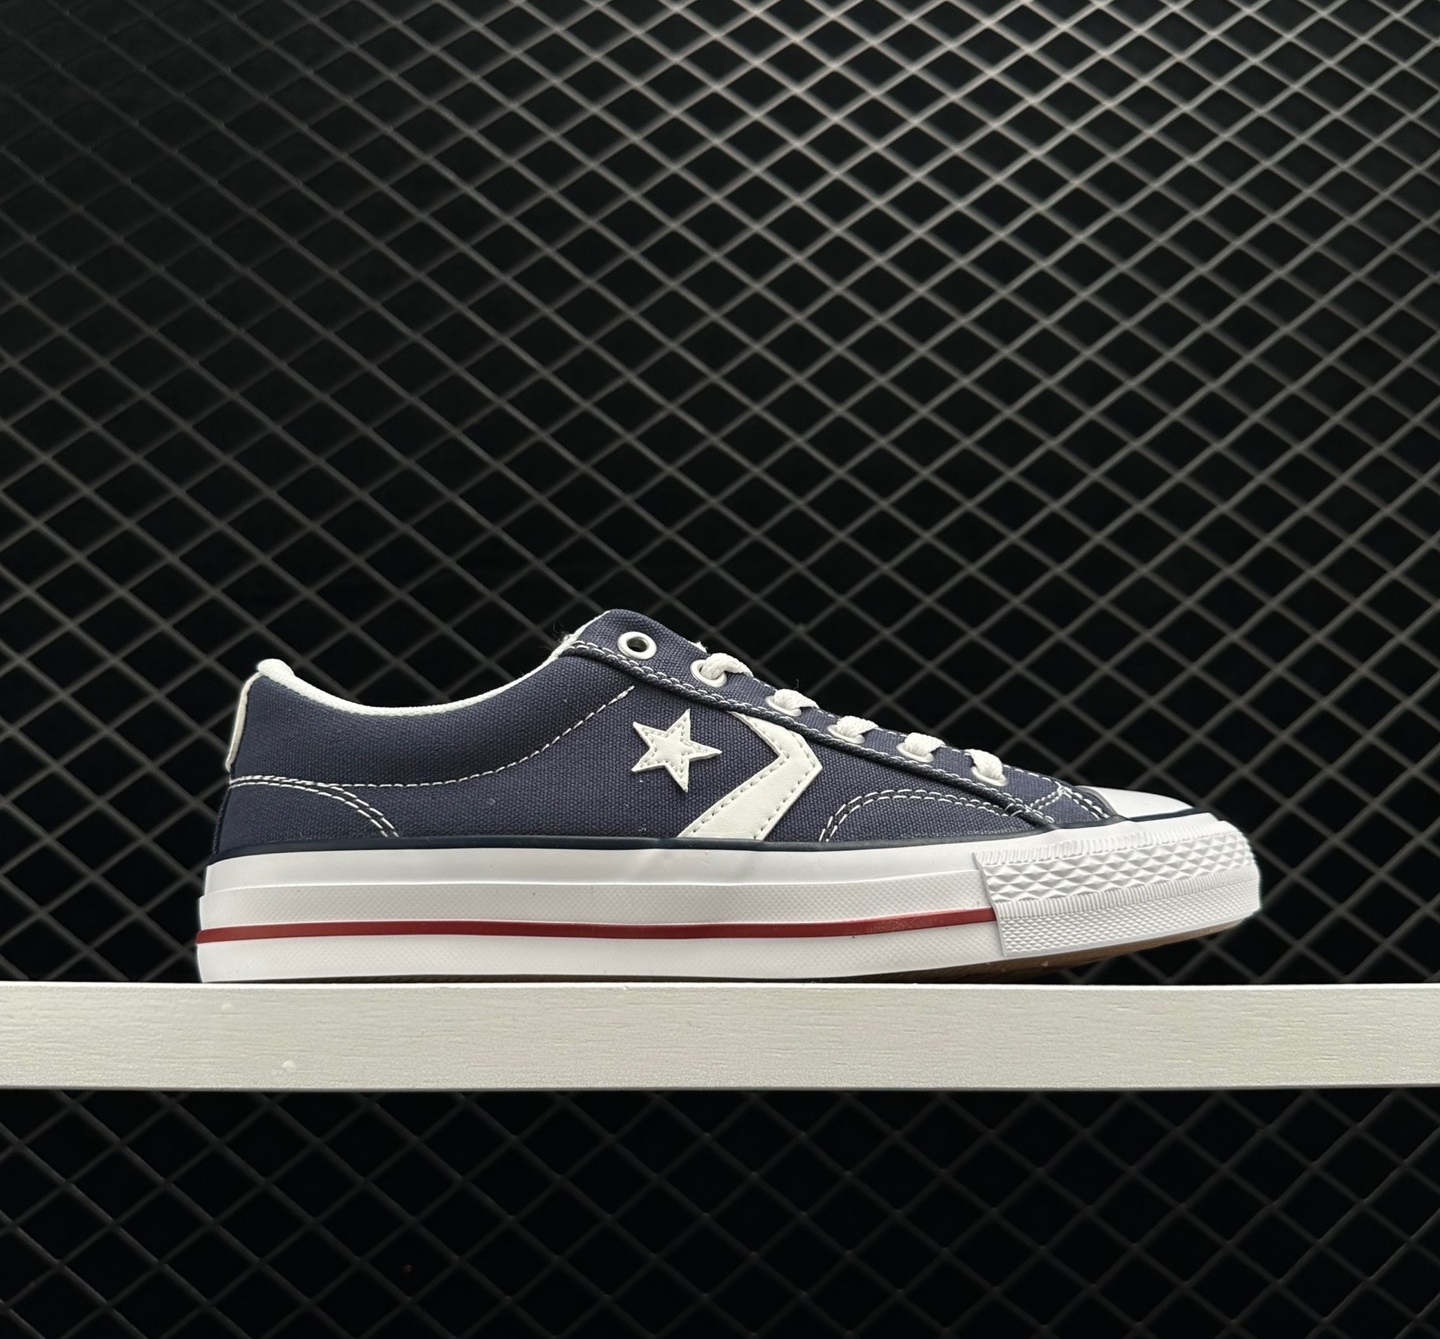 Converse Star Player Ox Blue 144150C - Stylish and Versatile Footwear